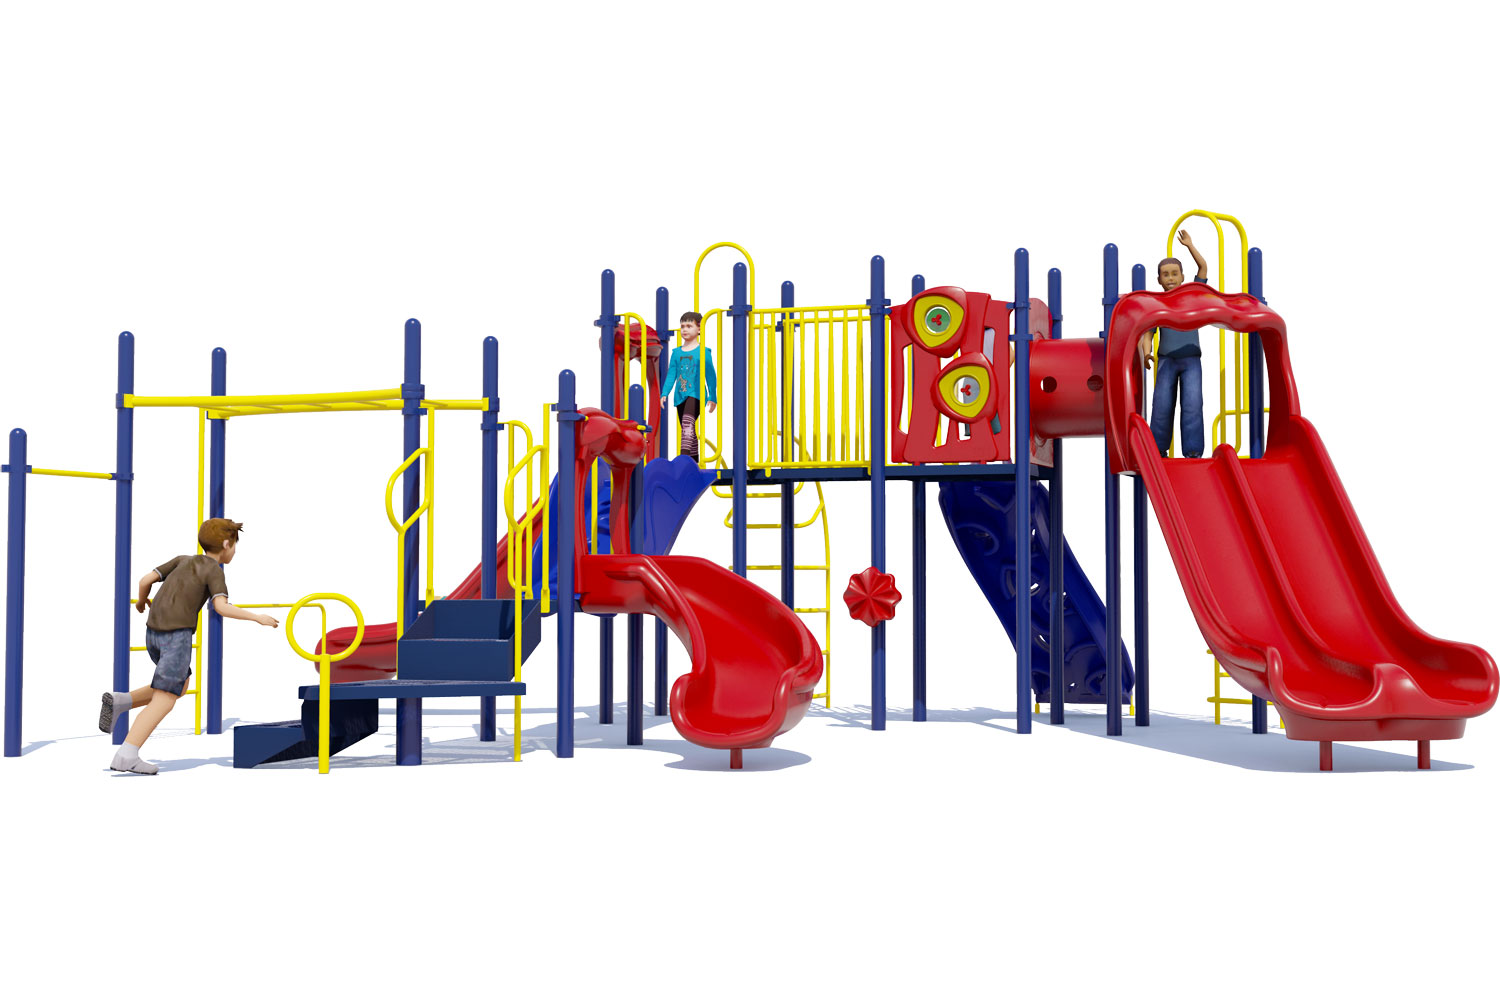 Cheer Delight Play Structure - Primary Colors - Front View